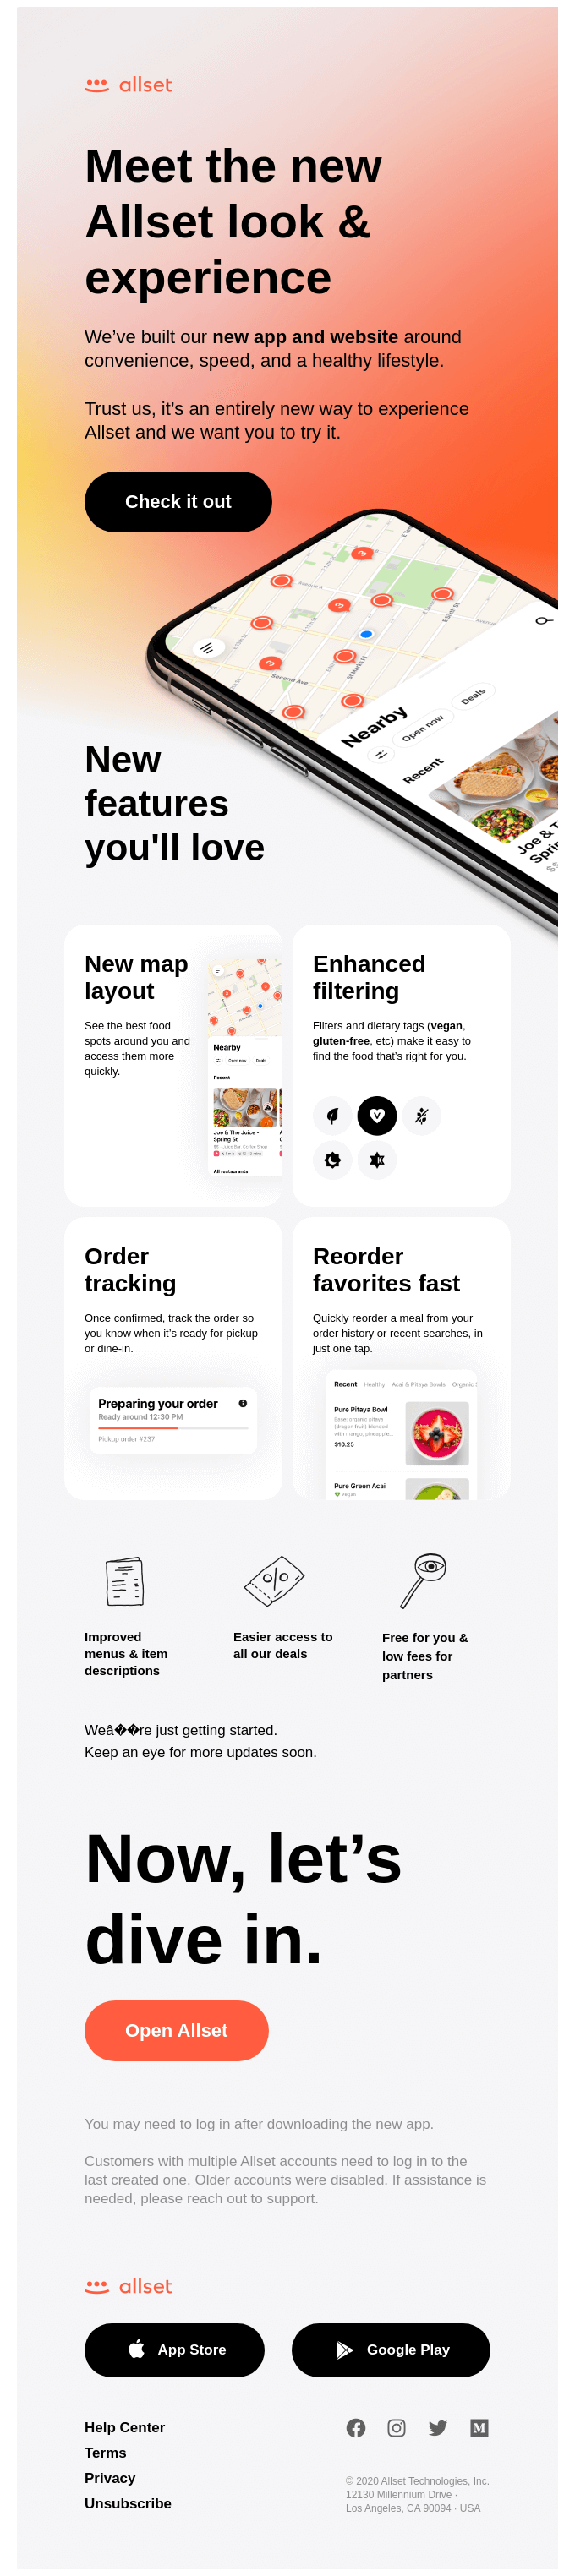 Introducing-the-new-allset-app